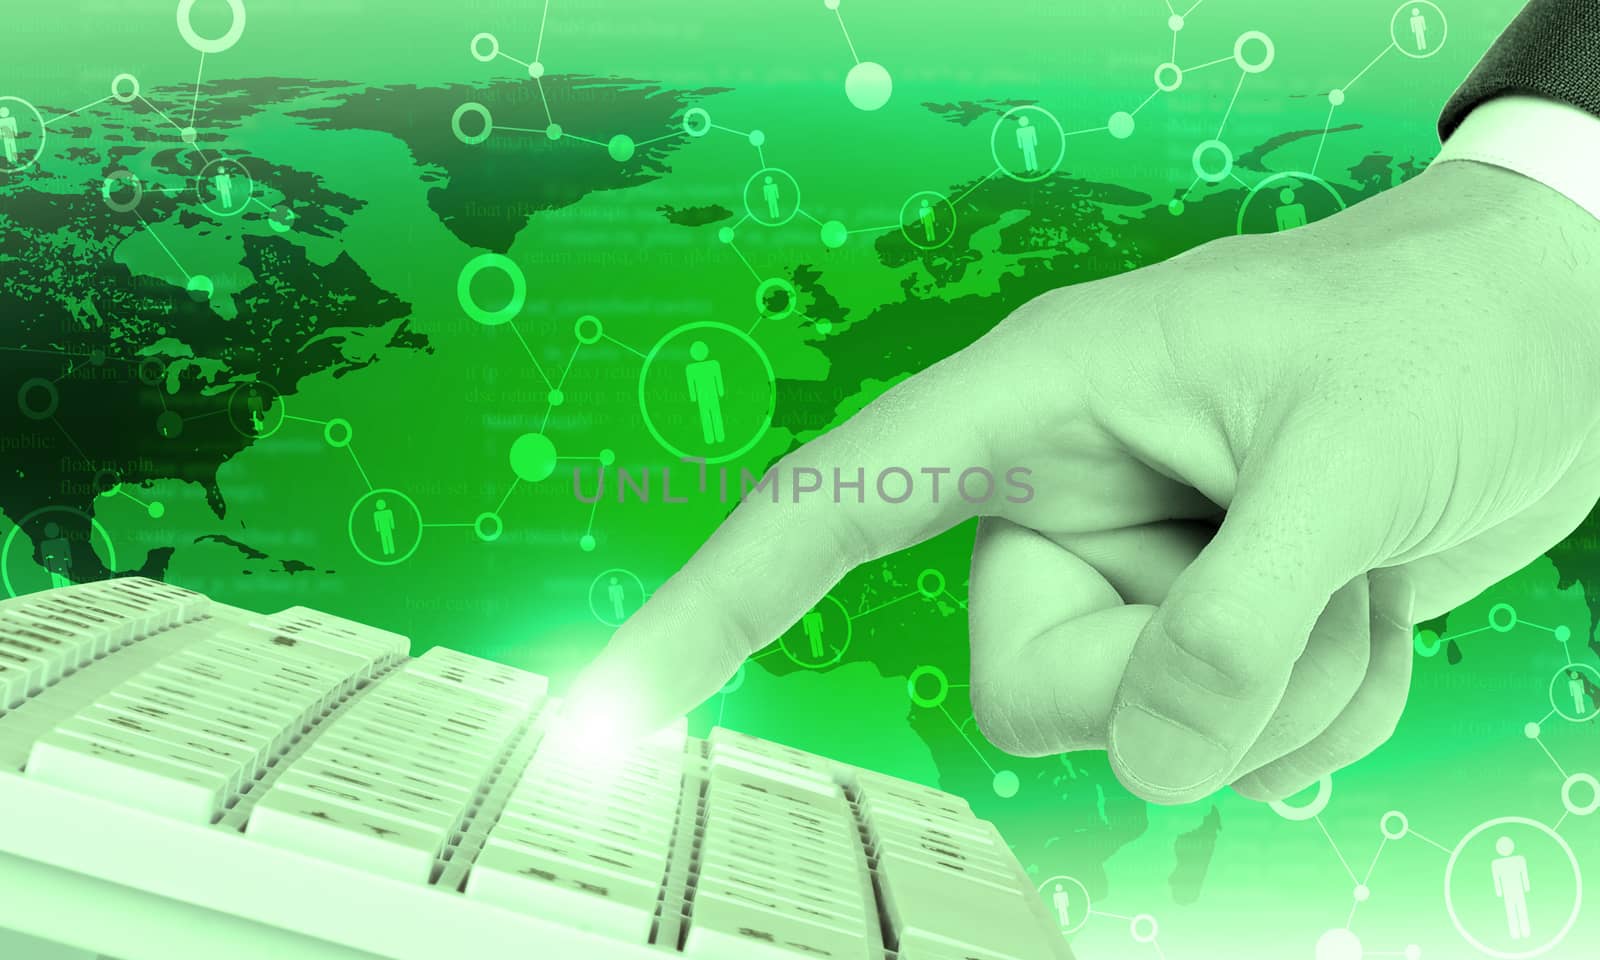 Businessmans finger pressing keyboard on abstract green background with world map